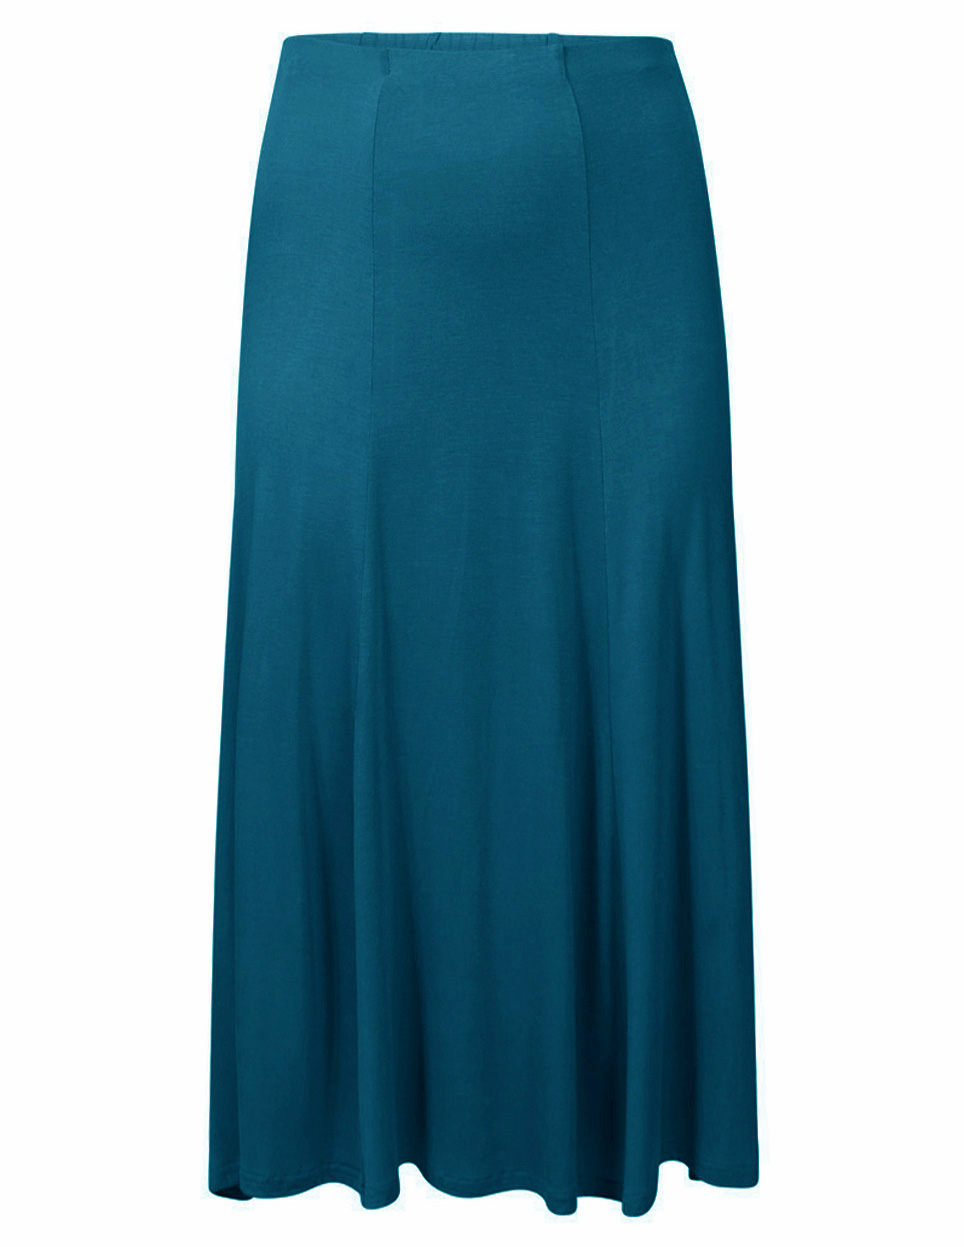 Simply Stock Shop - - TEAL Pull On Long Panelled Jersey Skirt - Size 10 ...